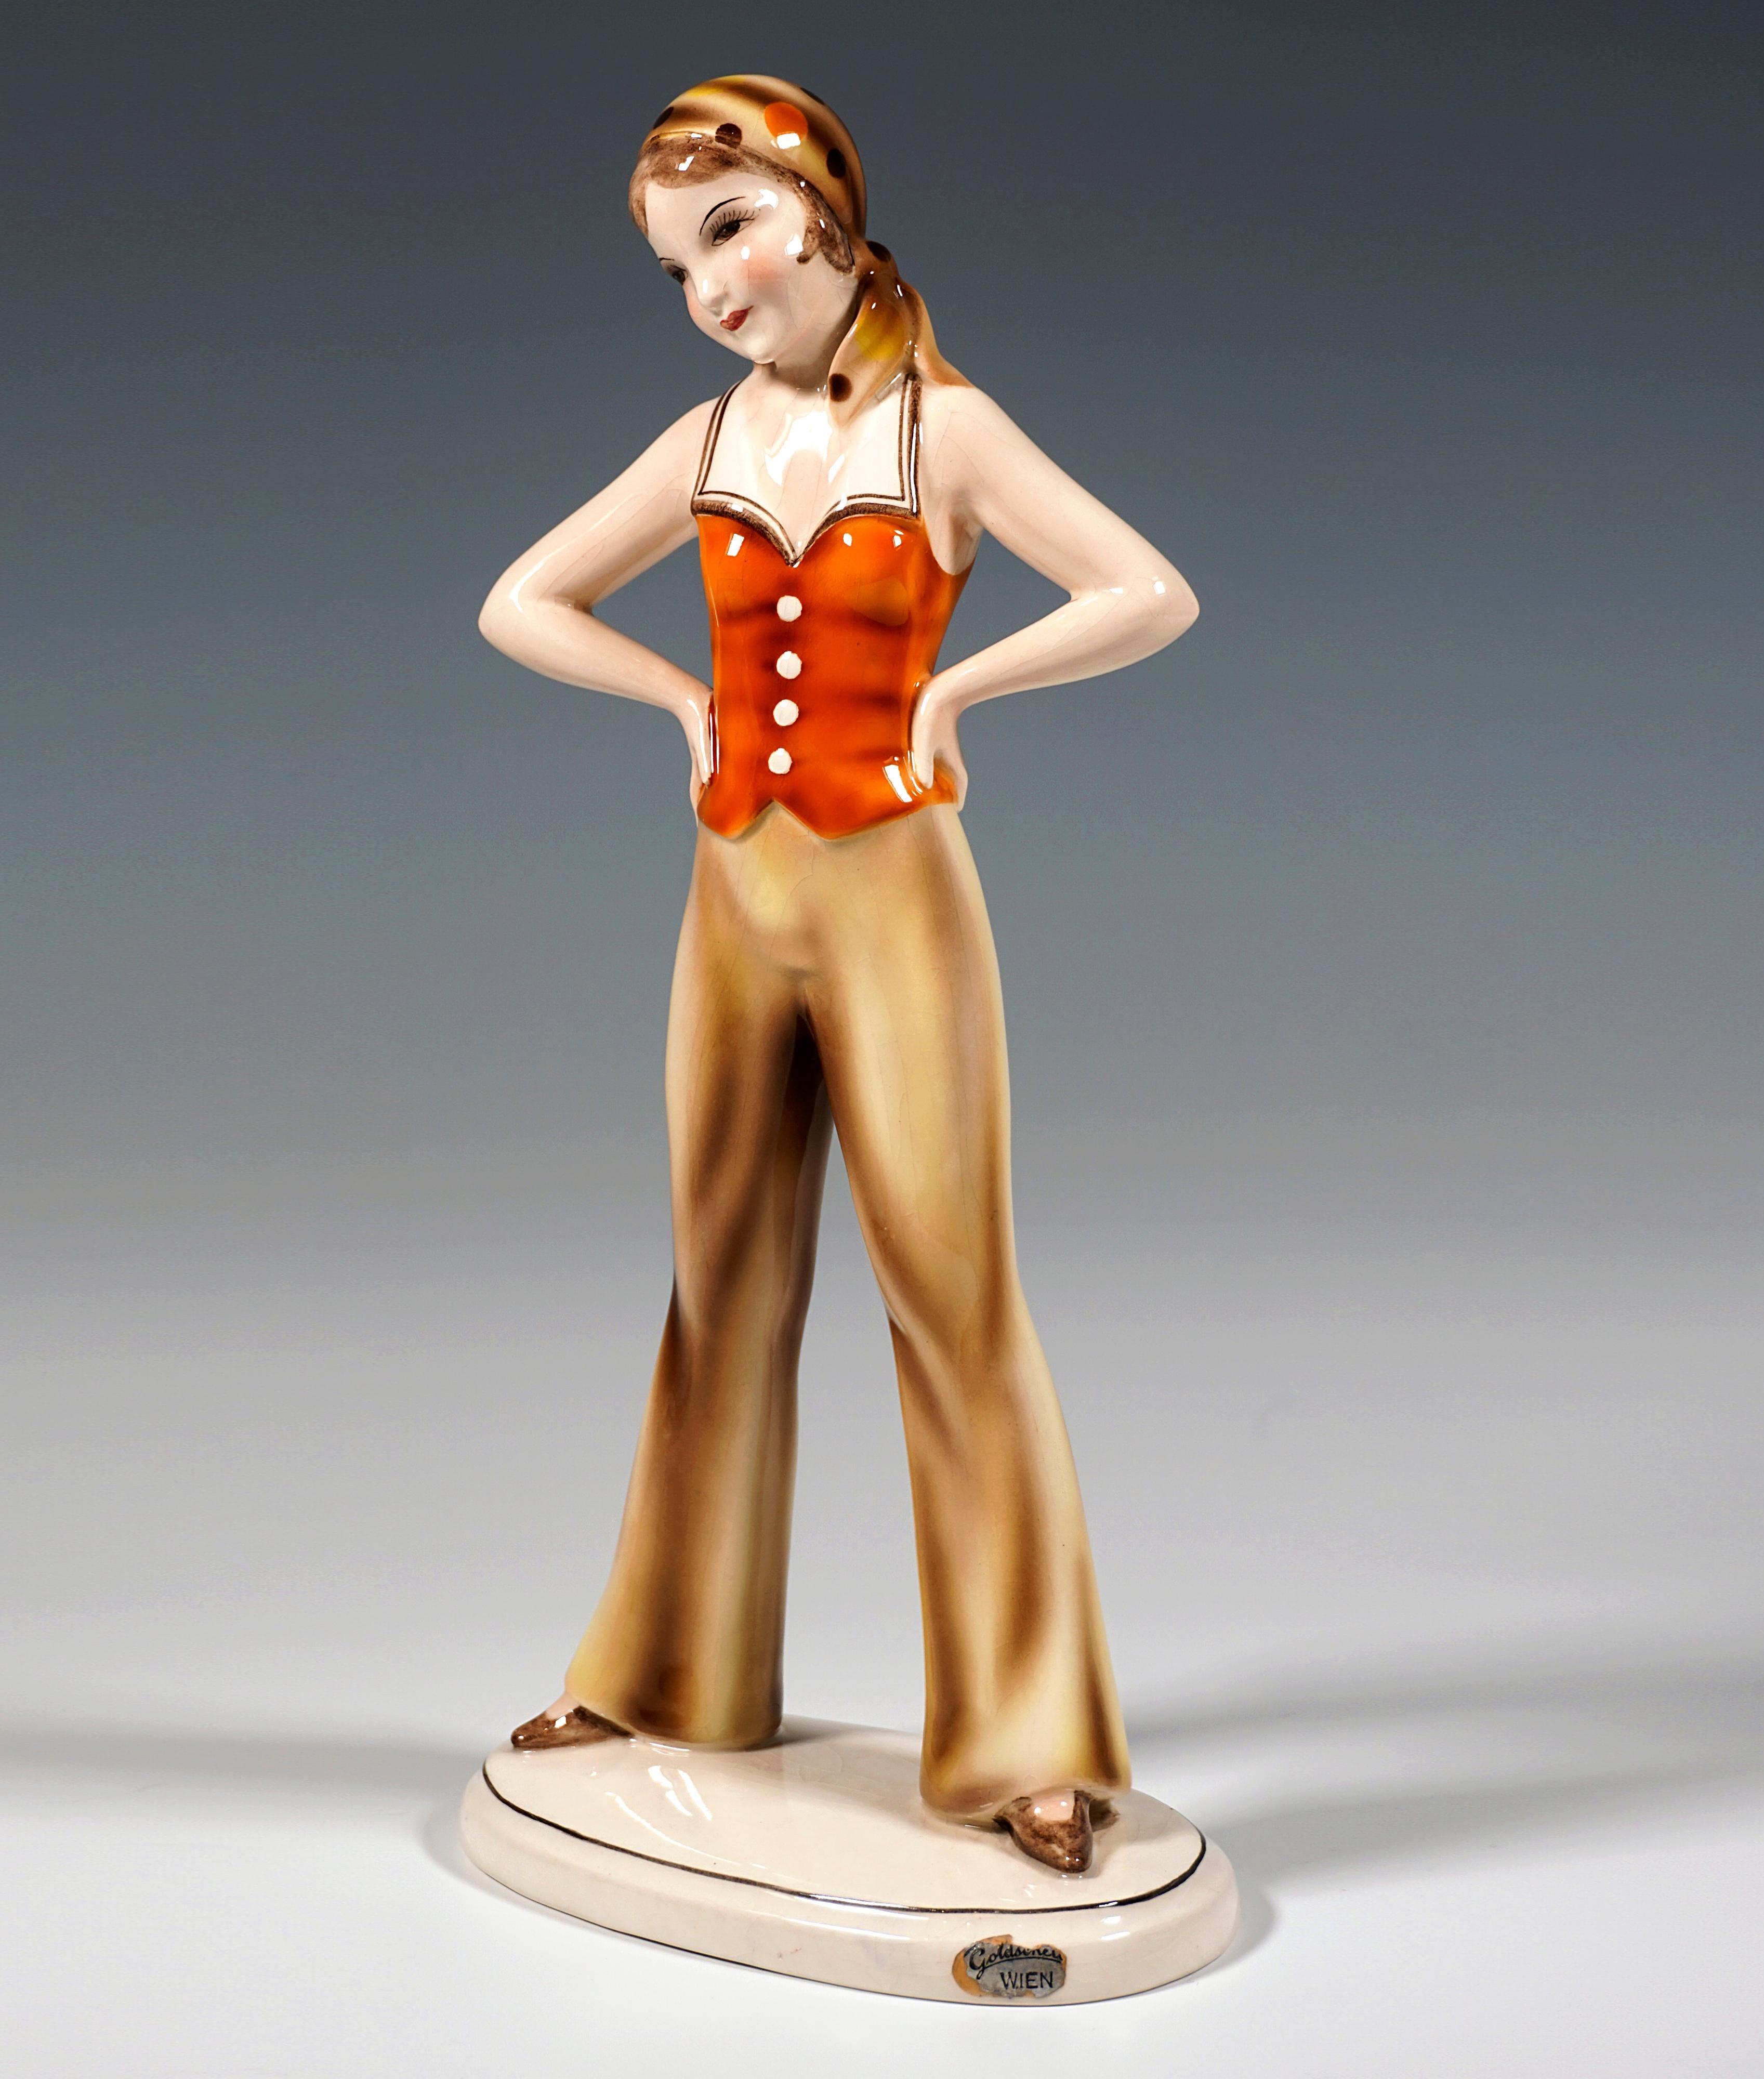 Very rare art ceramic figurine of the 1930s:
Standing girl with a dotted headscarf tied to the back of her head in orange and brown tones, dressed in a sleeveless orange top with a white collar and buttons at the front, long beige flared pants and